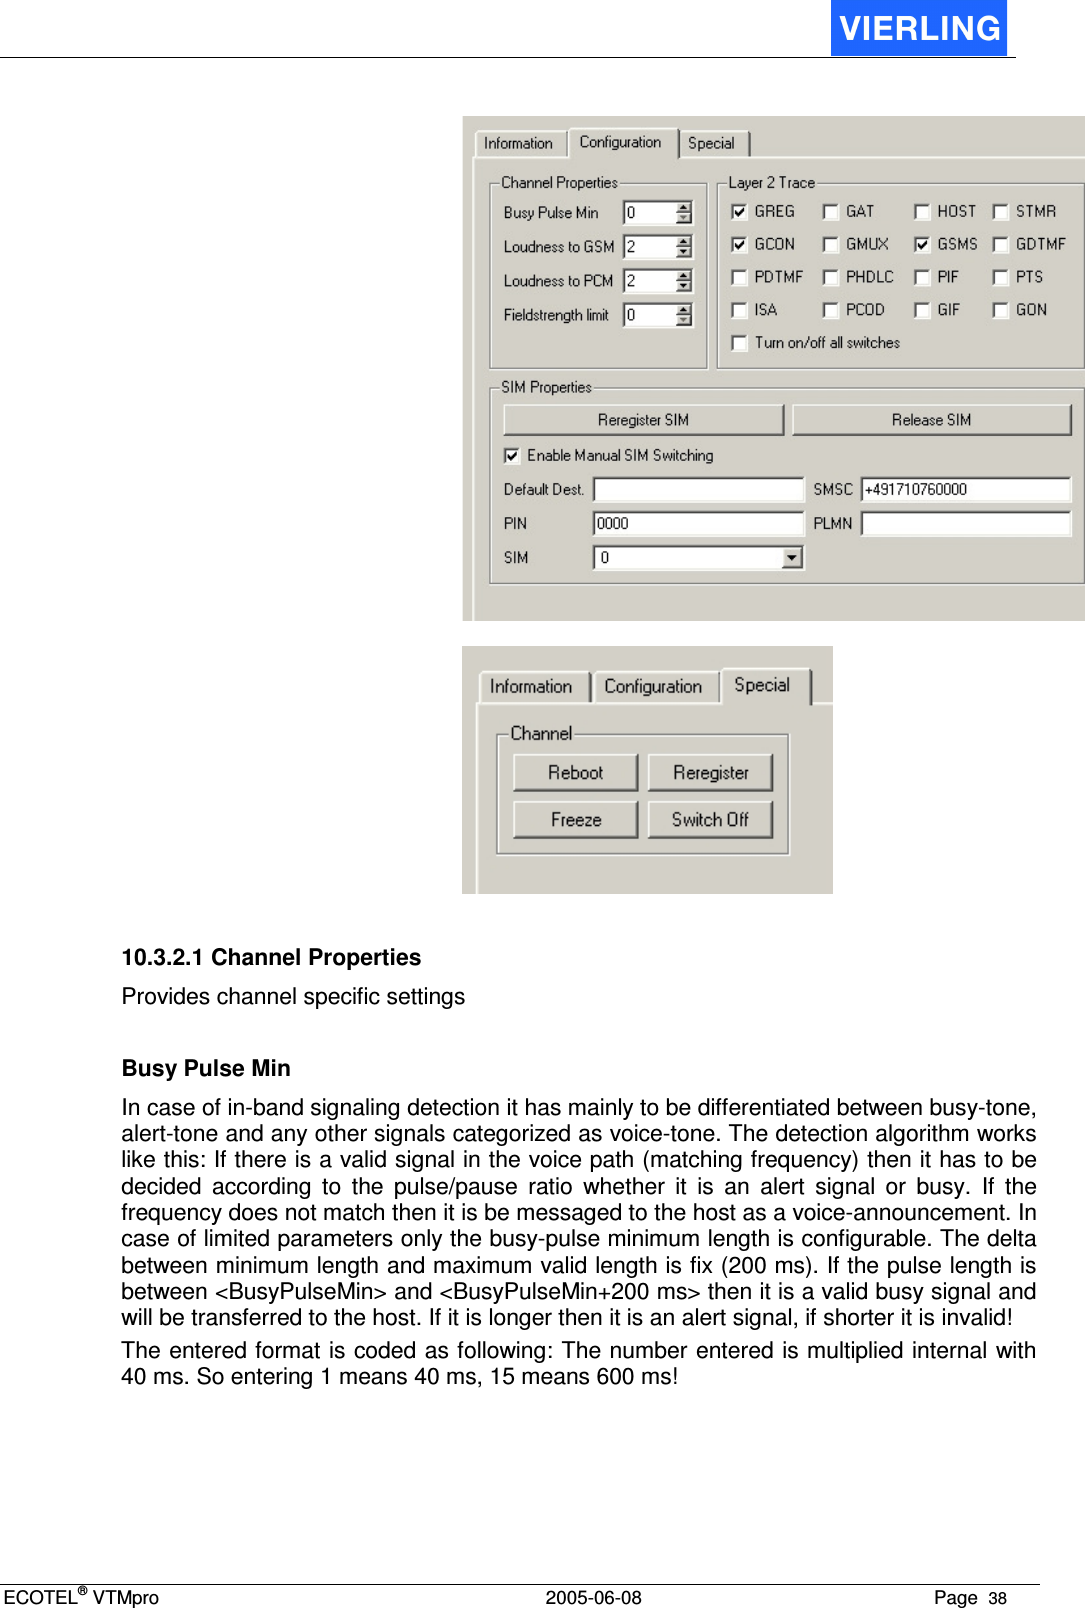 ECOTEL® VTMpro  2005-06-08 Page  38         10.3.2.1 Channel Properties Provides channel specific settings  Busy Pulse Min In case of in-band signaling detection it has mainly to be differentiated between busy-tone, alert-tone and any other signals categorized as voice-tone. The detection algorithm works like this: If there is a valid signal in the voice path (matching frequency) then it has to be decided  according  to  the  pulse/pause  ratio  whether  it  is  an  alert  signal  or  busy.  If  the frequency does not match then it is be messaged to the host as a voice-announcement. In case of limited parameters only the busy-pulse minimum length is configurable. The delta between minimum length and maximum valid length is fix (200 ms). If the pulse length is between &lt;BusyPulseMin&gt; and &lt;BusyPulseMin+200 ms&gt; then it is a valid busy signal and will be transferred to the host. If it is longer then it is an alert signal, if shorter it is invalid! The entered format is coded as following: The number entered is multiplied internal with 40 ms. So entering 1 means 40 ms, 15 means 600 ms!     